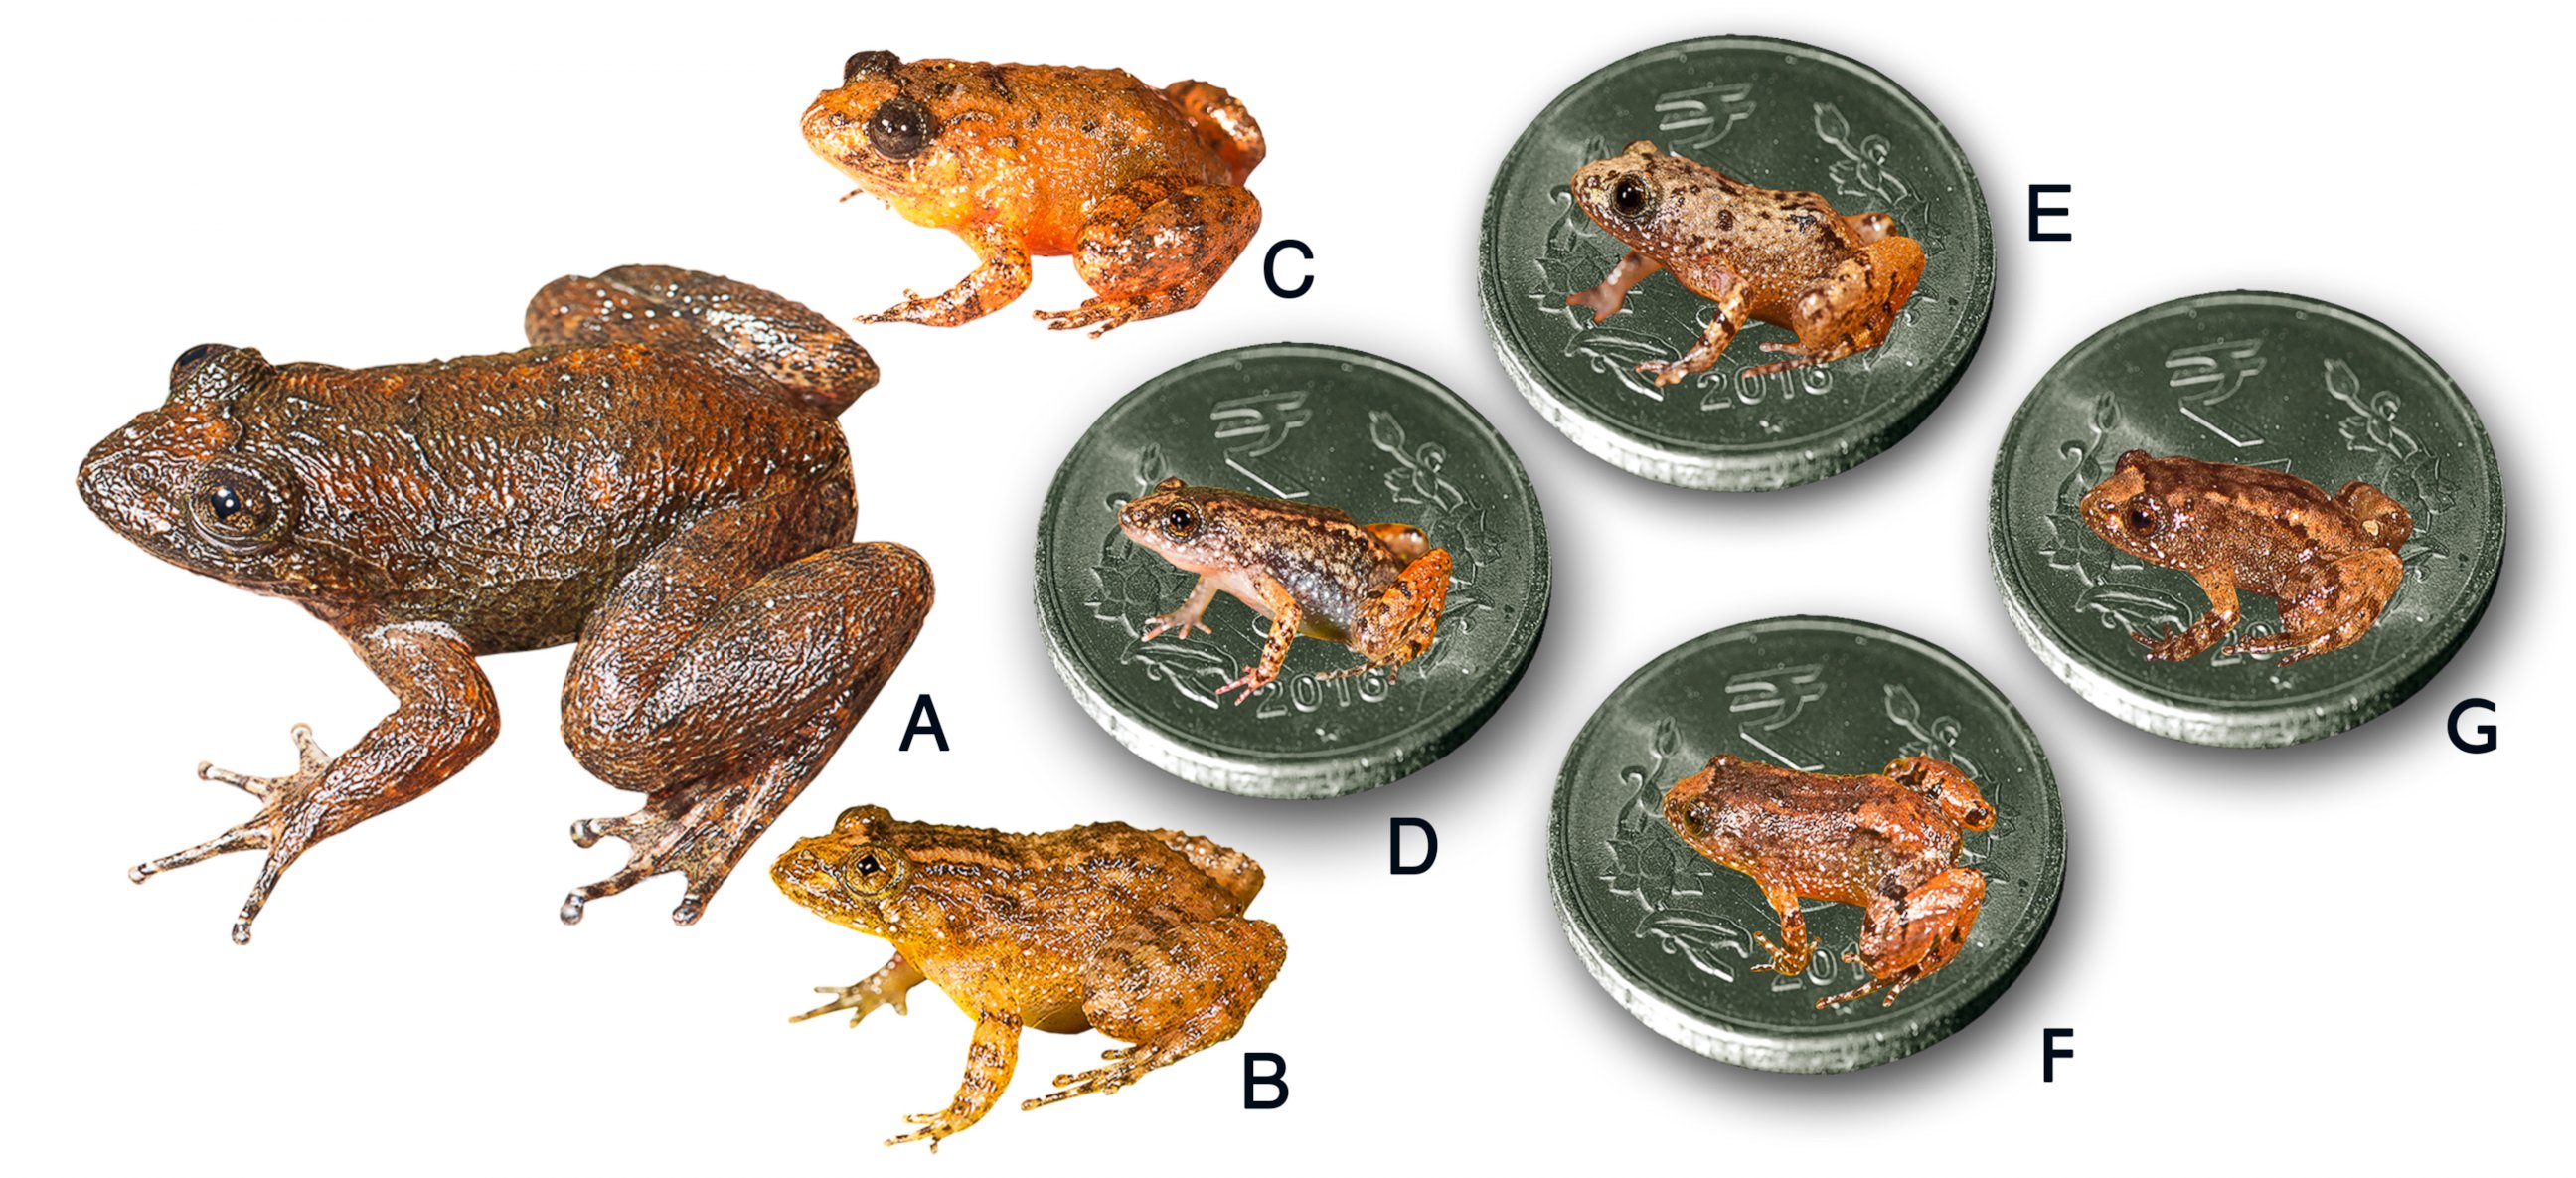 meet the mini frogs of madagascar, brazil and india